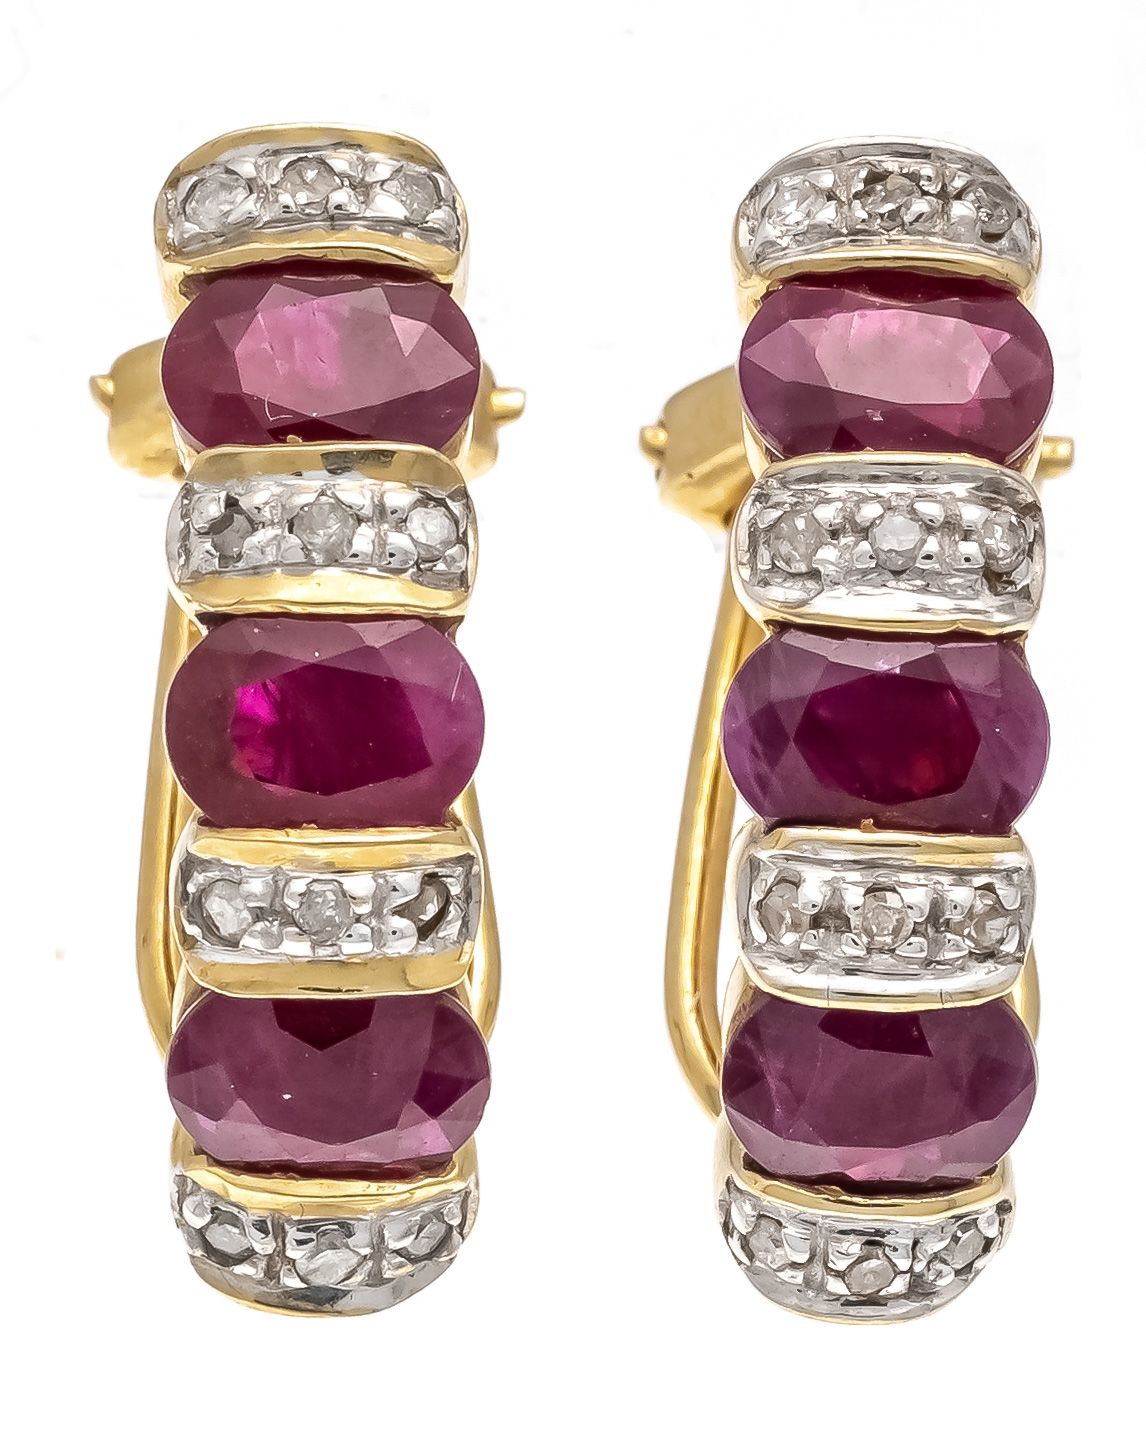 Null Ruby diamond clip earrings GG/WG 585/000 with 3 oval faceted rubies 5 mm ea&hellip;